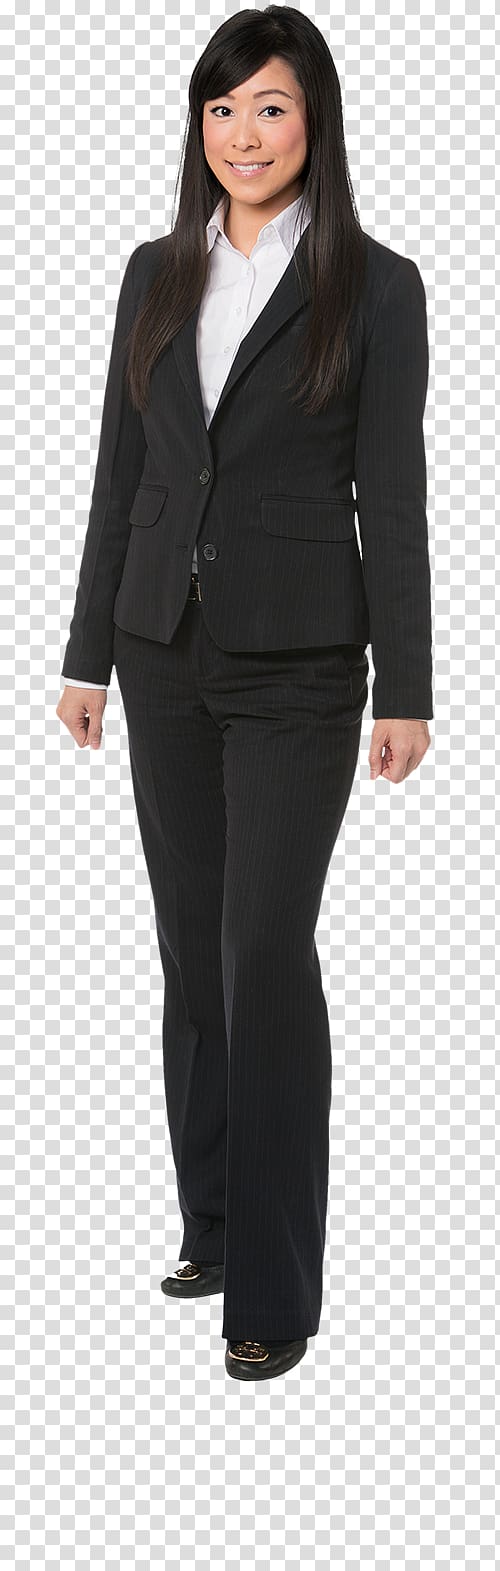 Blazer Lawyer Simpson, Thomas & Associates, Vancouver Formal wear Property Brokers, Formal Attire For Women transparent background PNG clipart